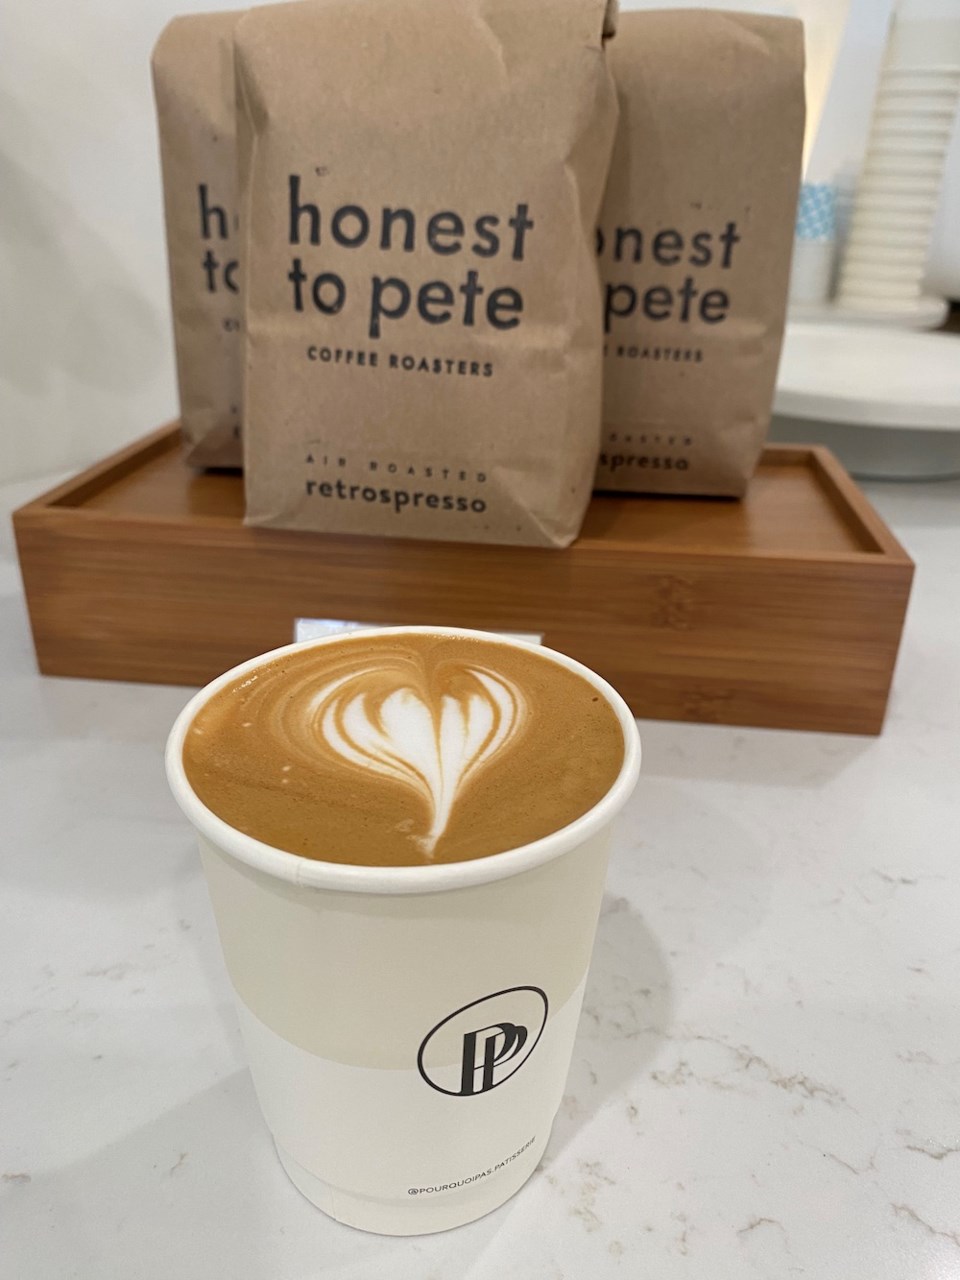 a-cup-pf-honest-to-pete-coffee